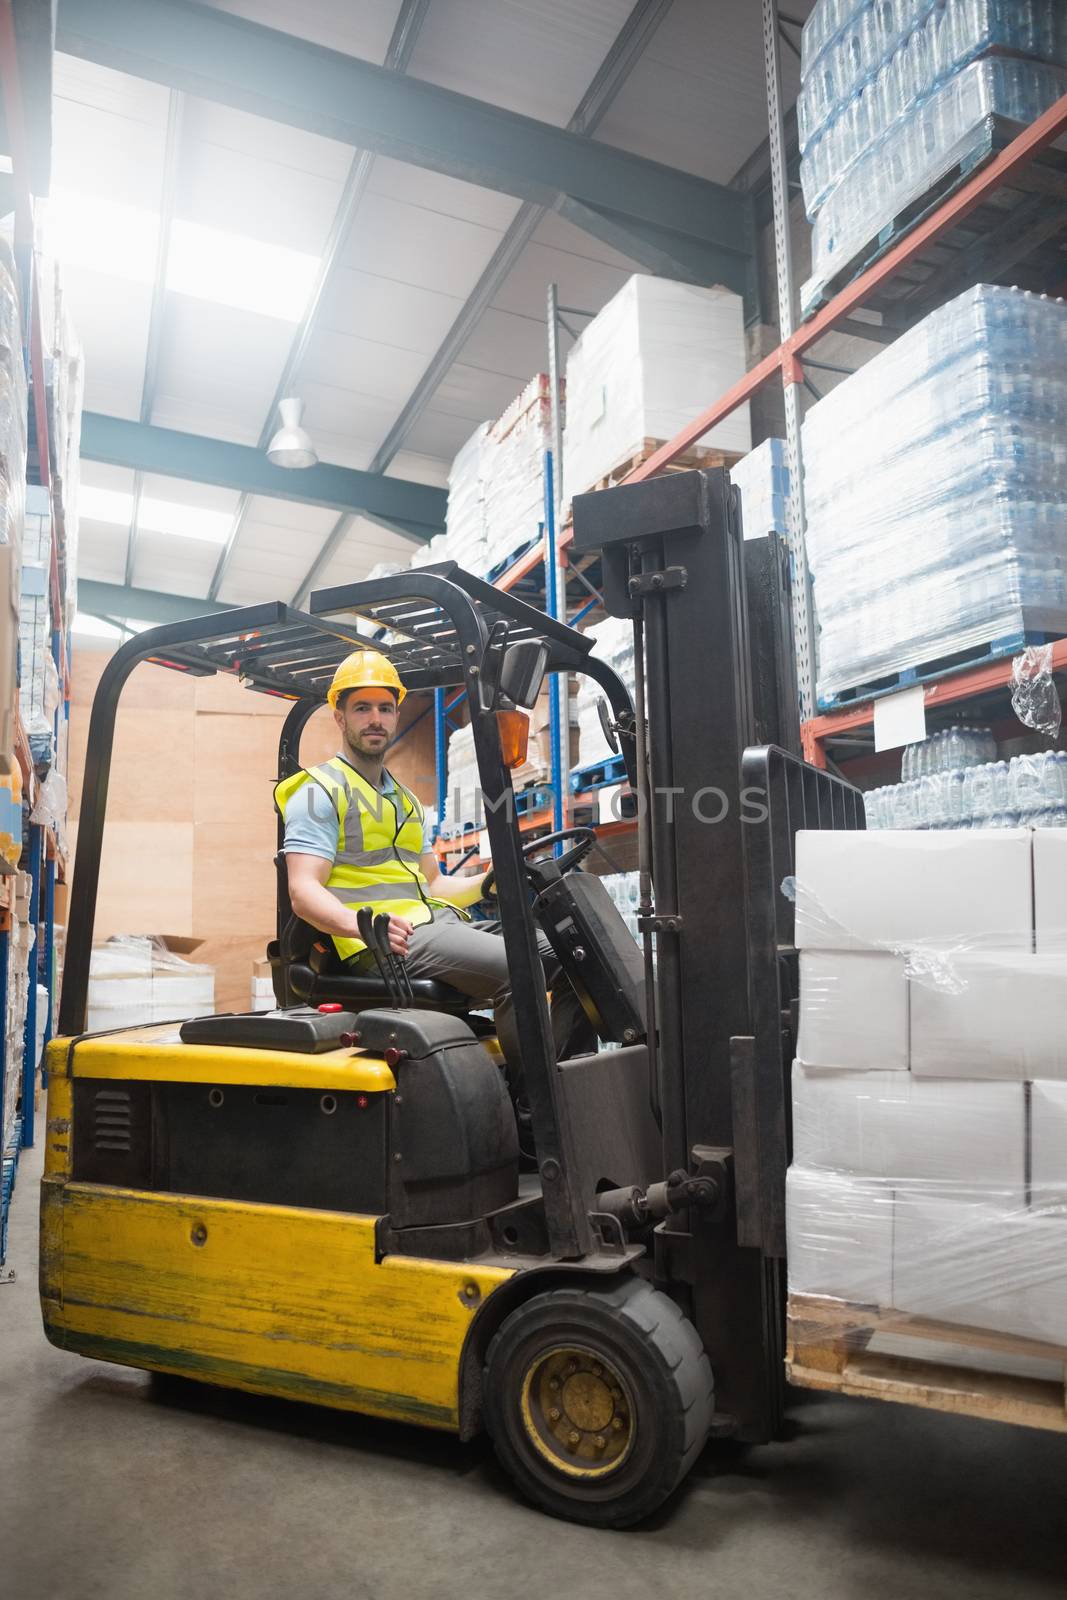 Smiling driver operating forklift machine in warehouse